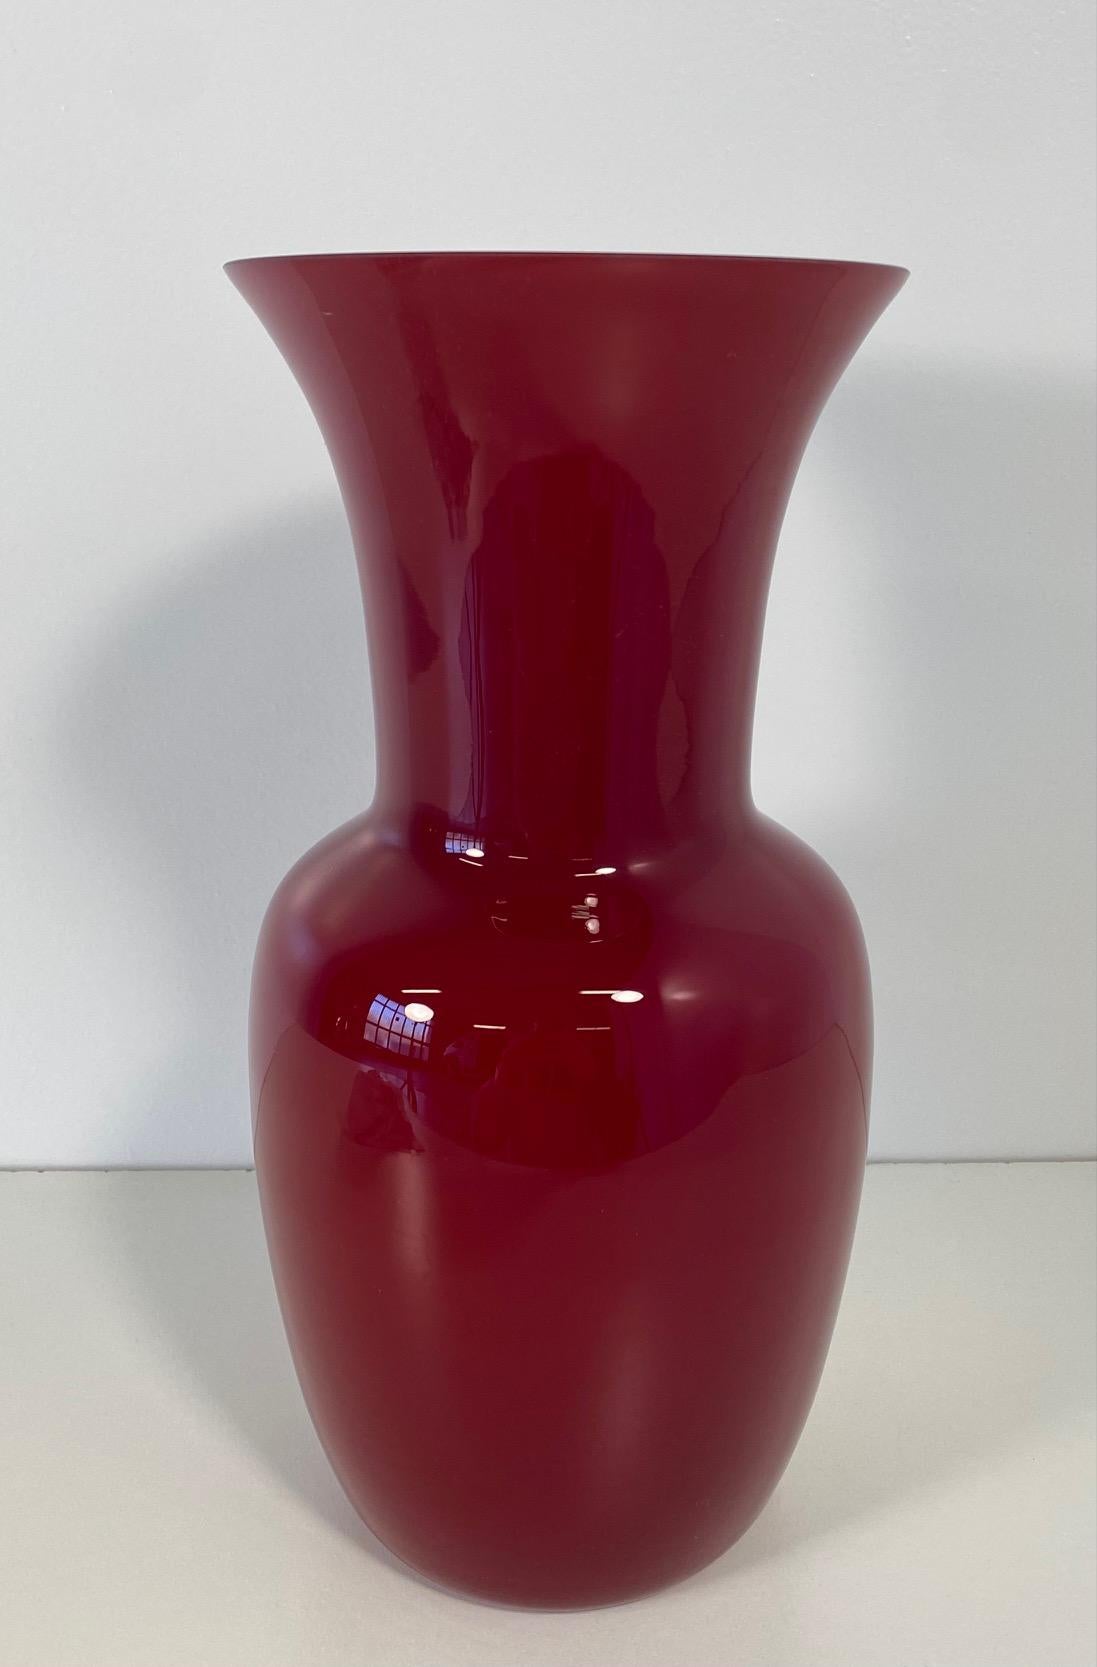 Vase in blown opal glass, red on the outside and white on the inside, produced by Venini in Murano, Venice (Italy). 

Signed under the base 'Venini 2006'.